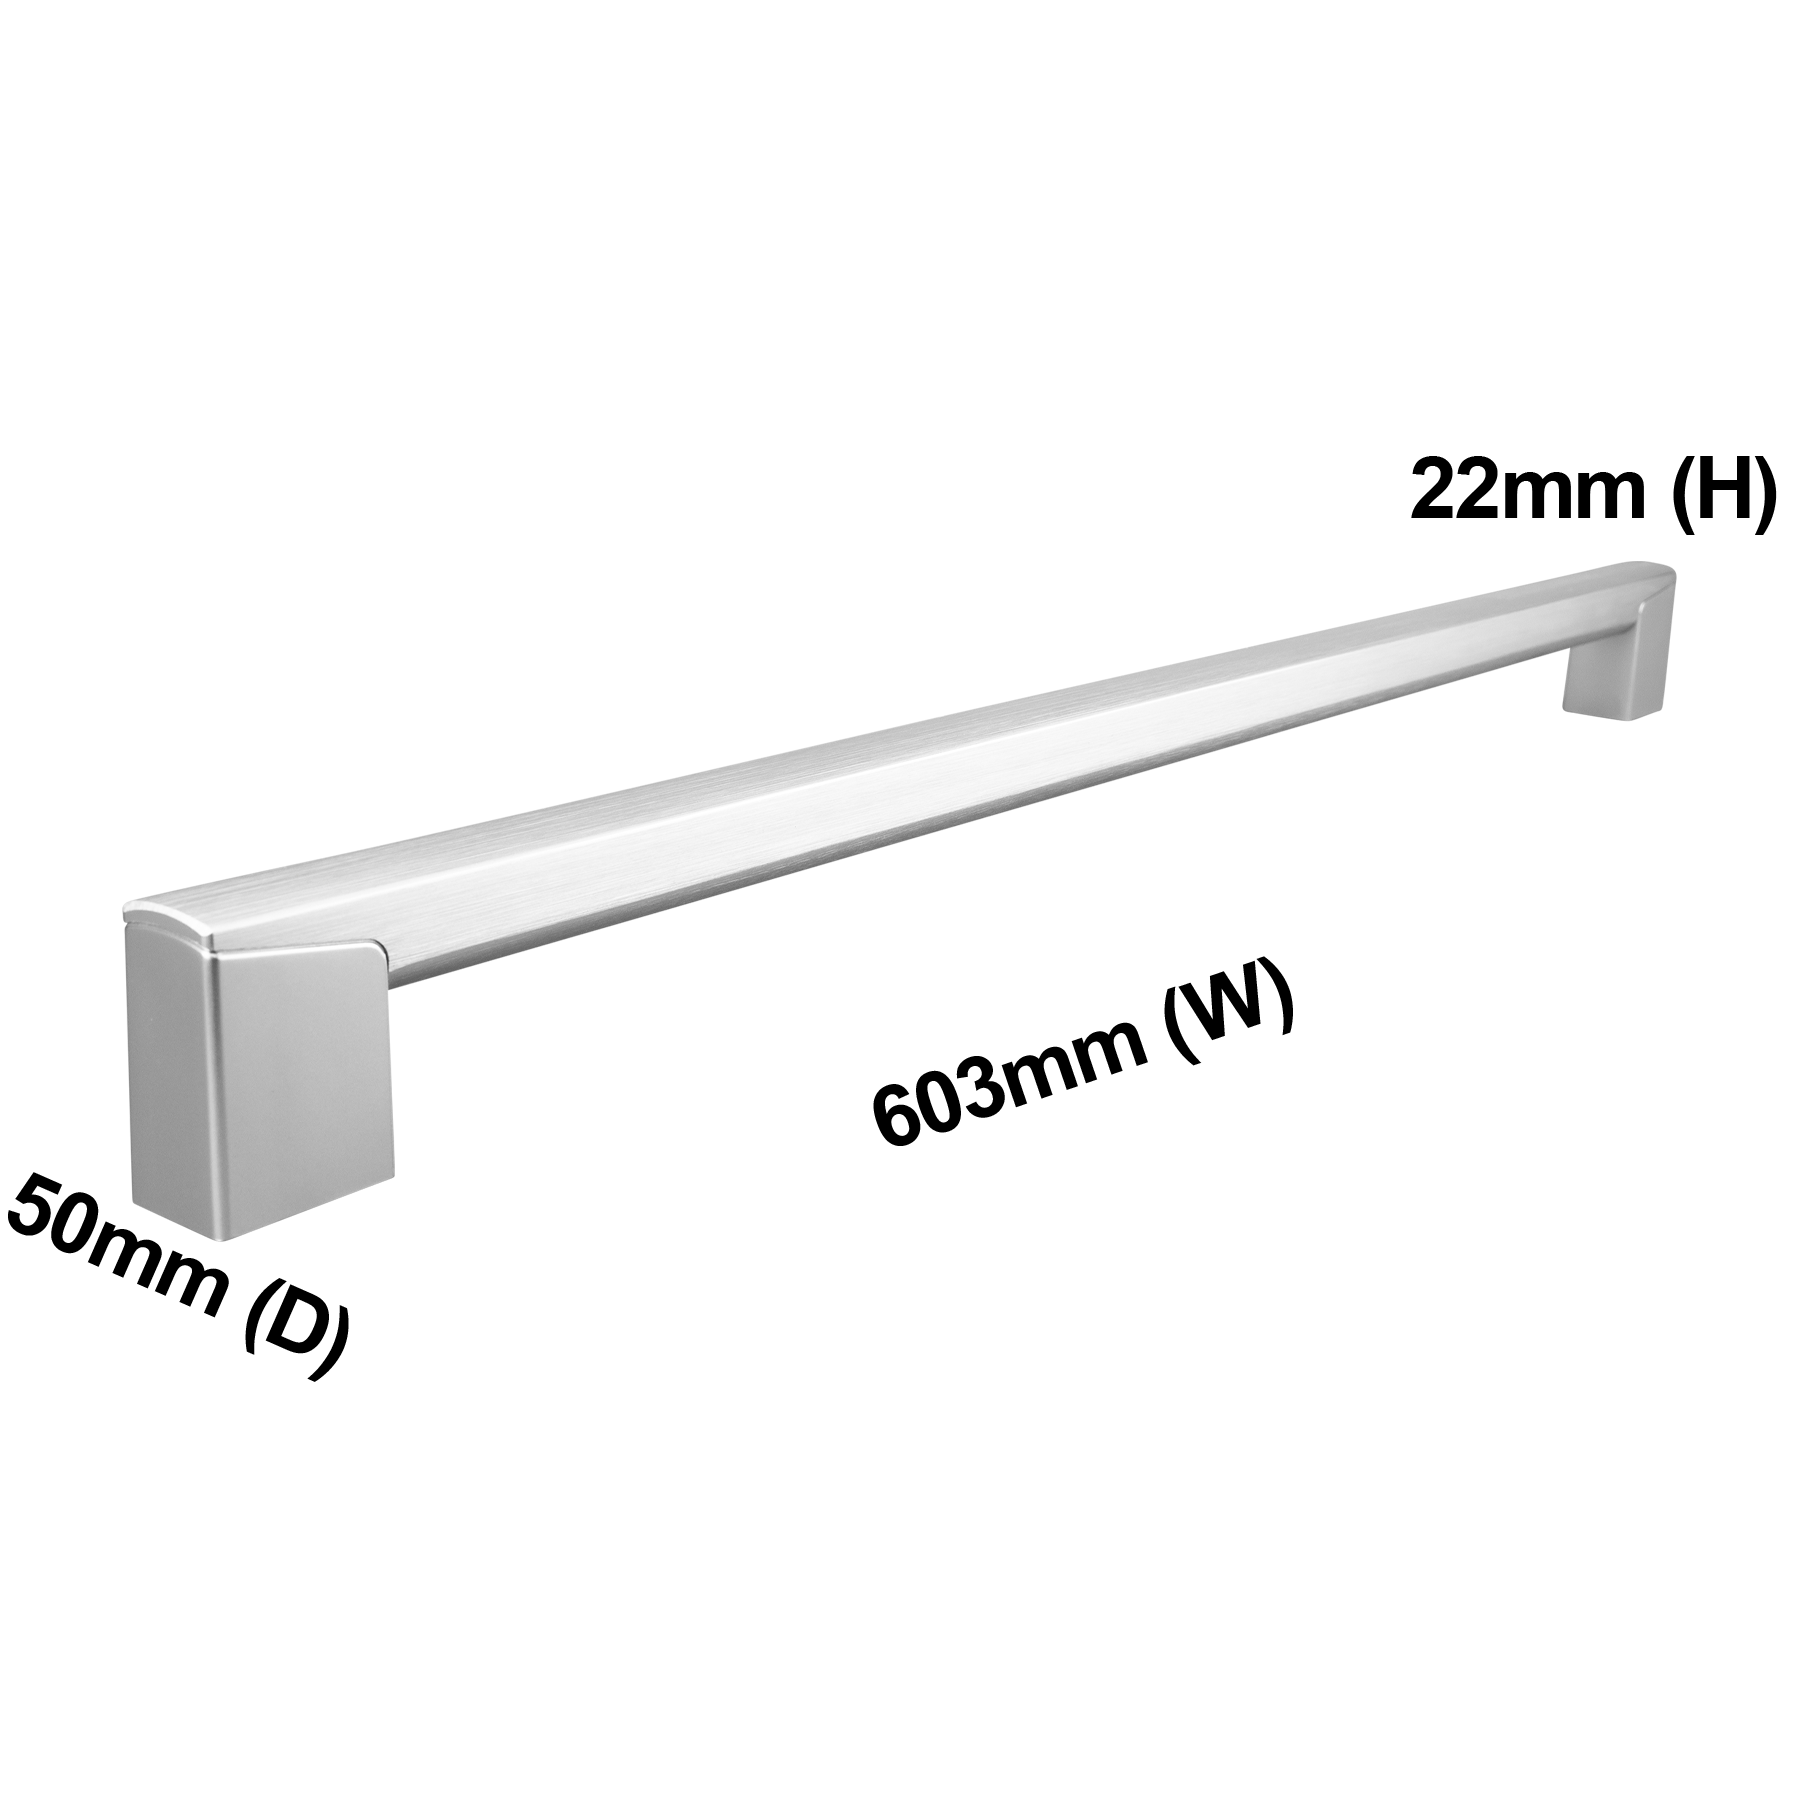 /globalassets/0-spareparts/skufhnd-a223cbkz-handle-assembly-freezer-left-or-right-front.png